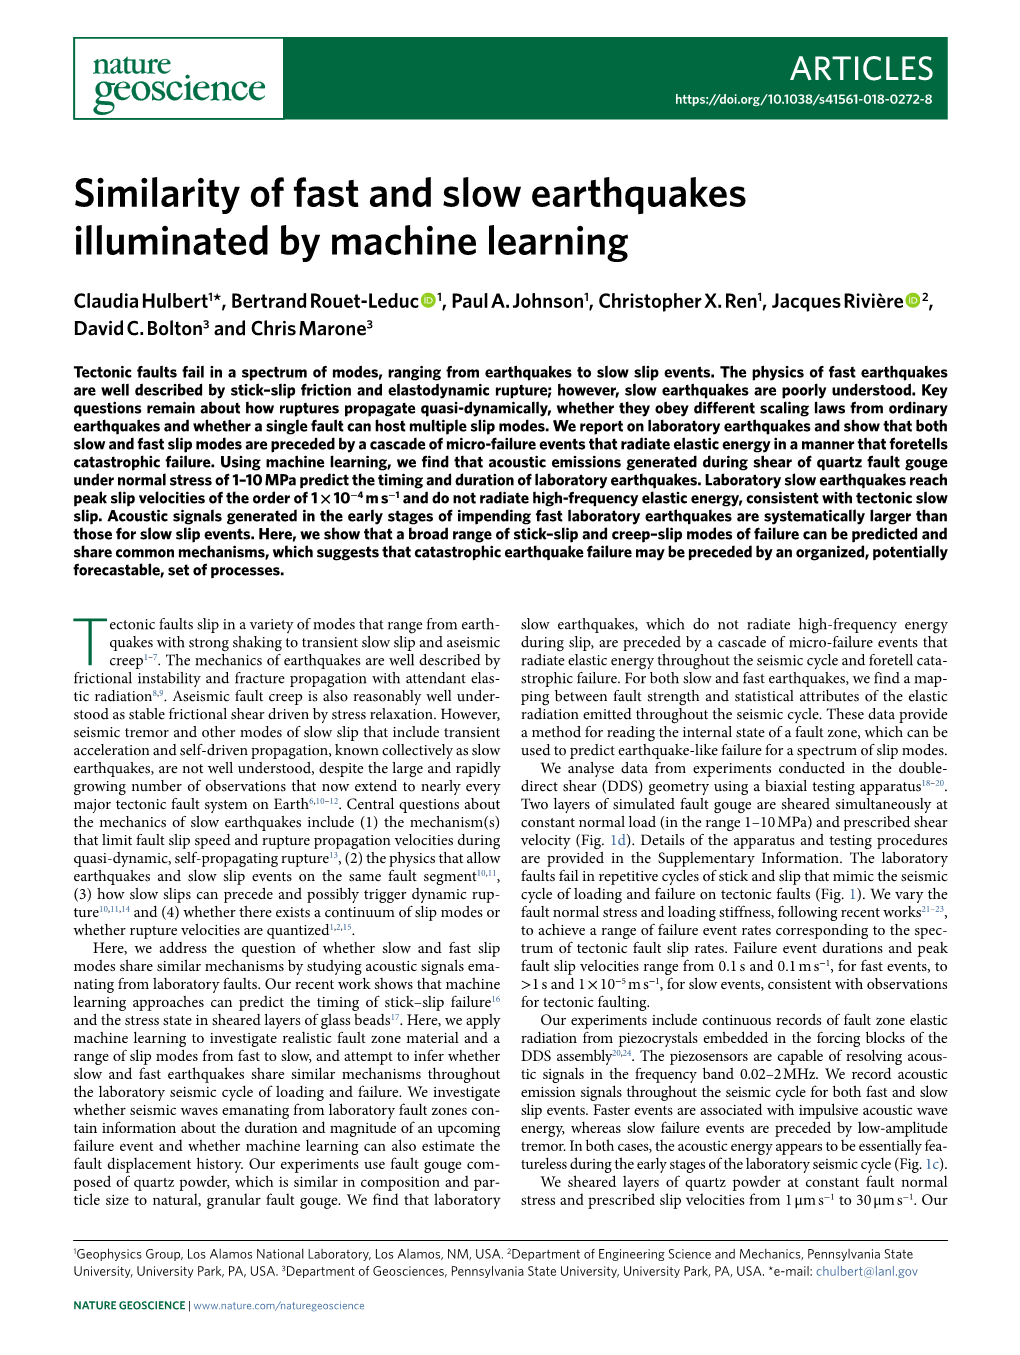 Similarity of Fast and Slow Earthquakes Illuminated by Machine Learning